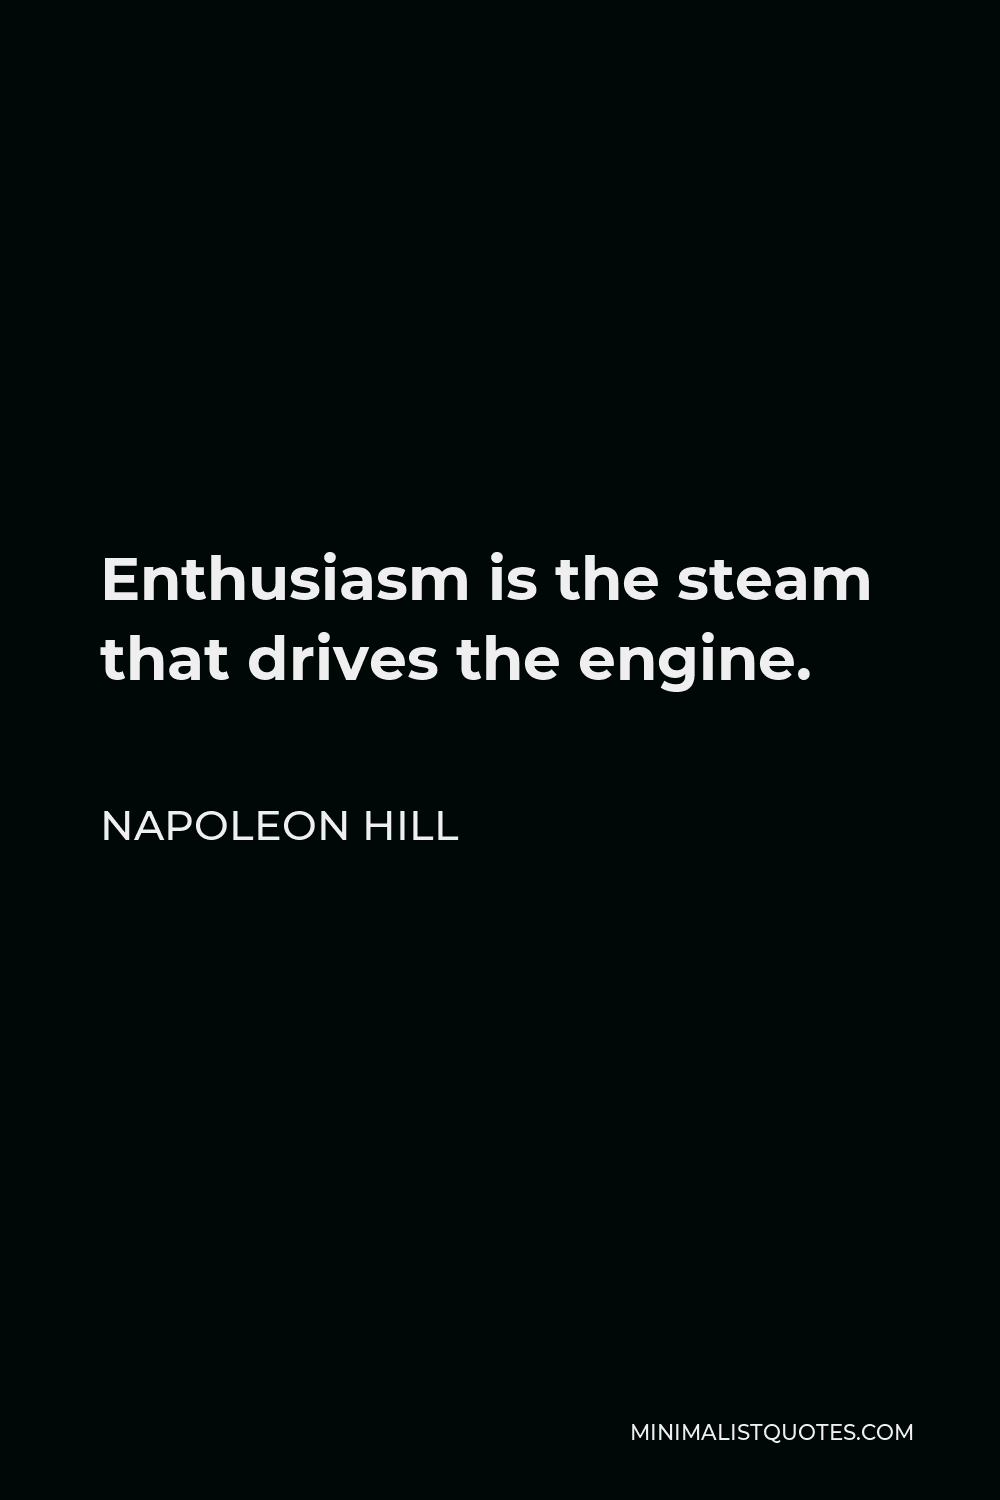 Napoleon Hill Quote - Enthusiasm is the steam that drives the engine.